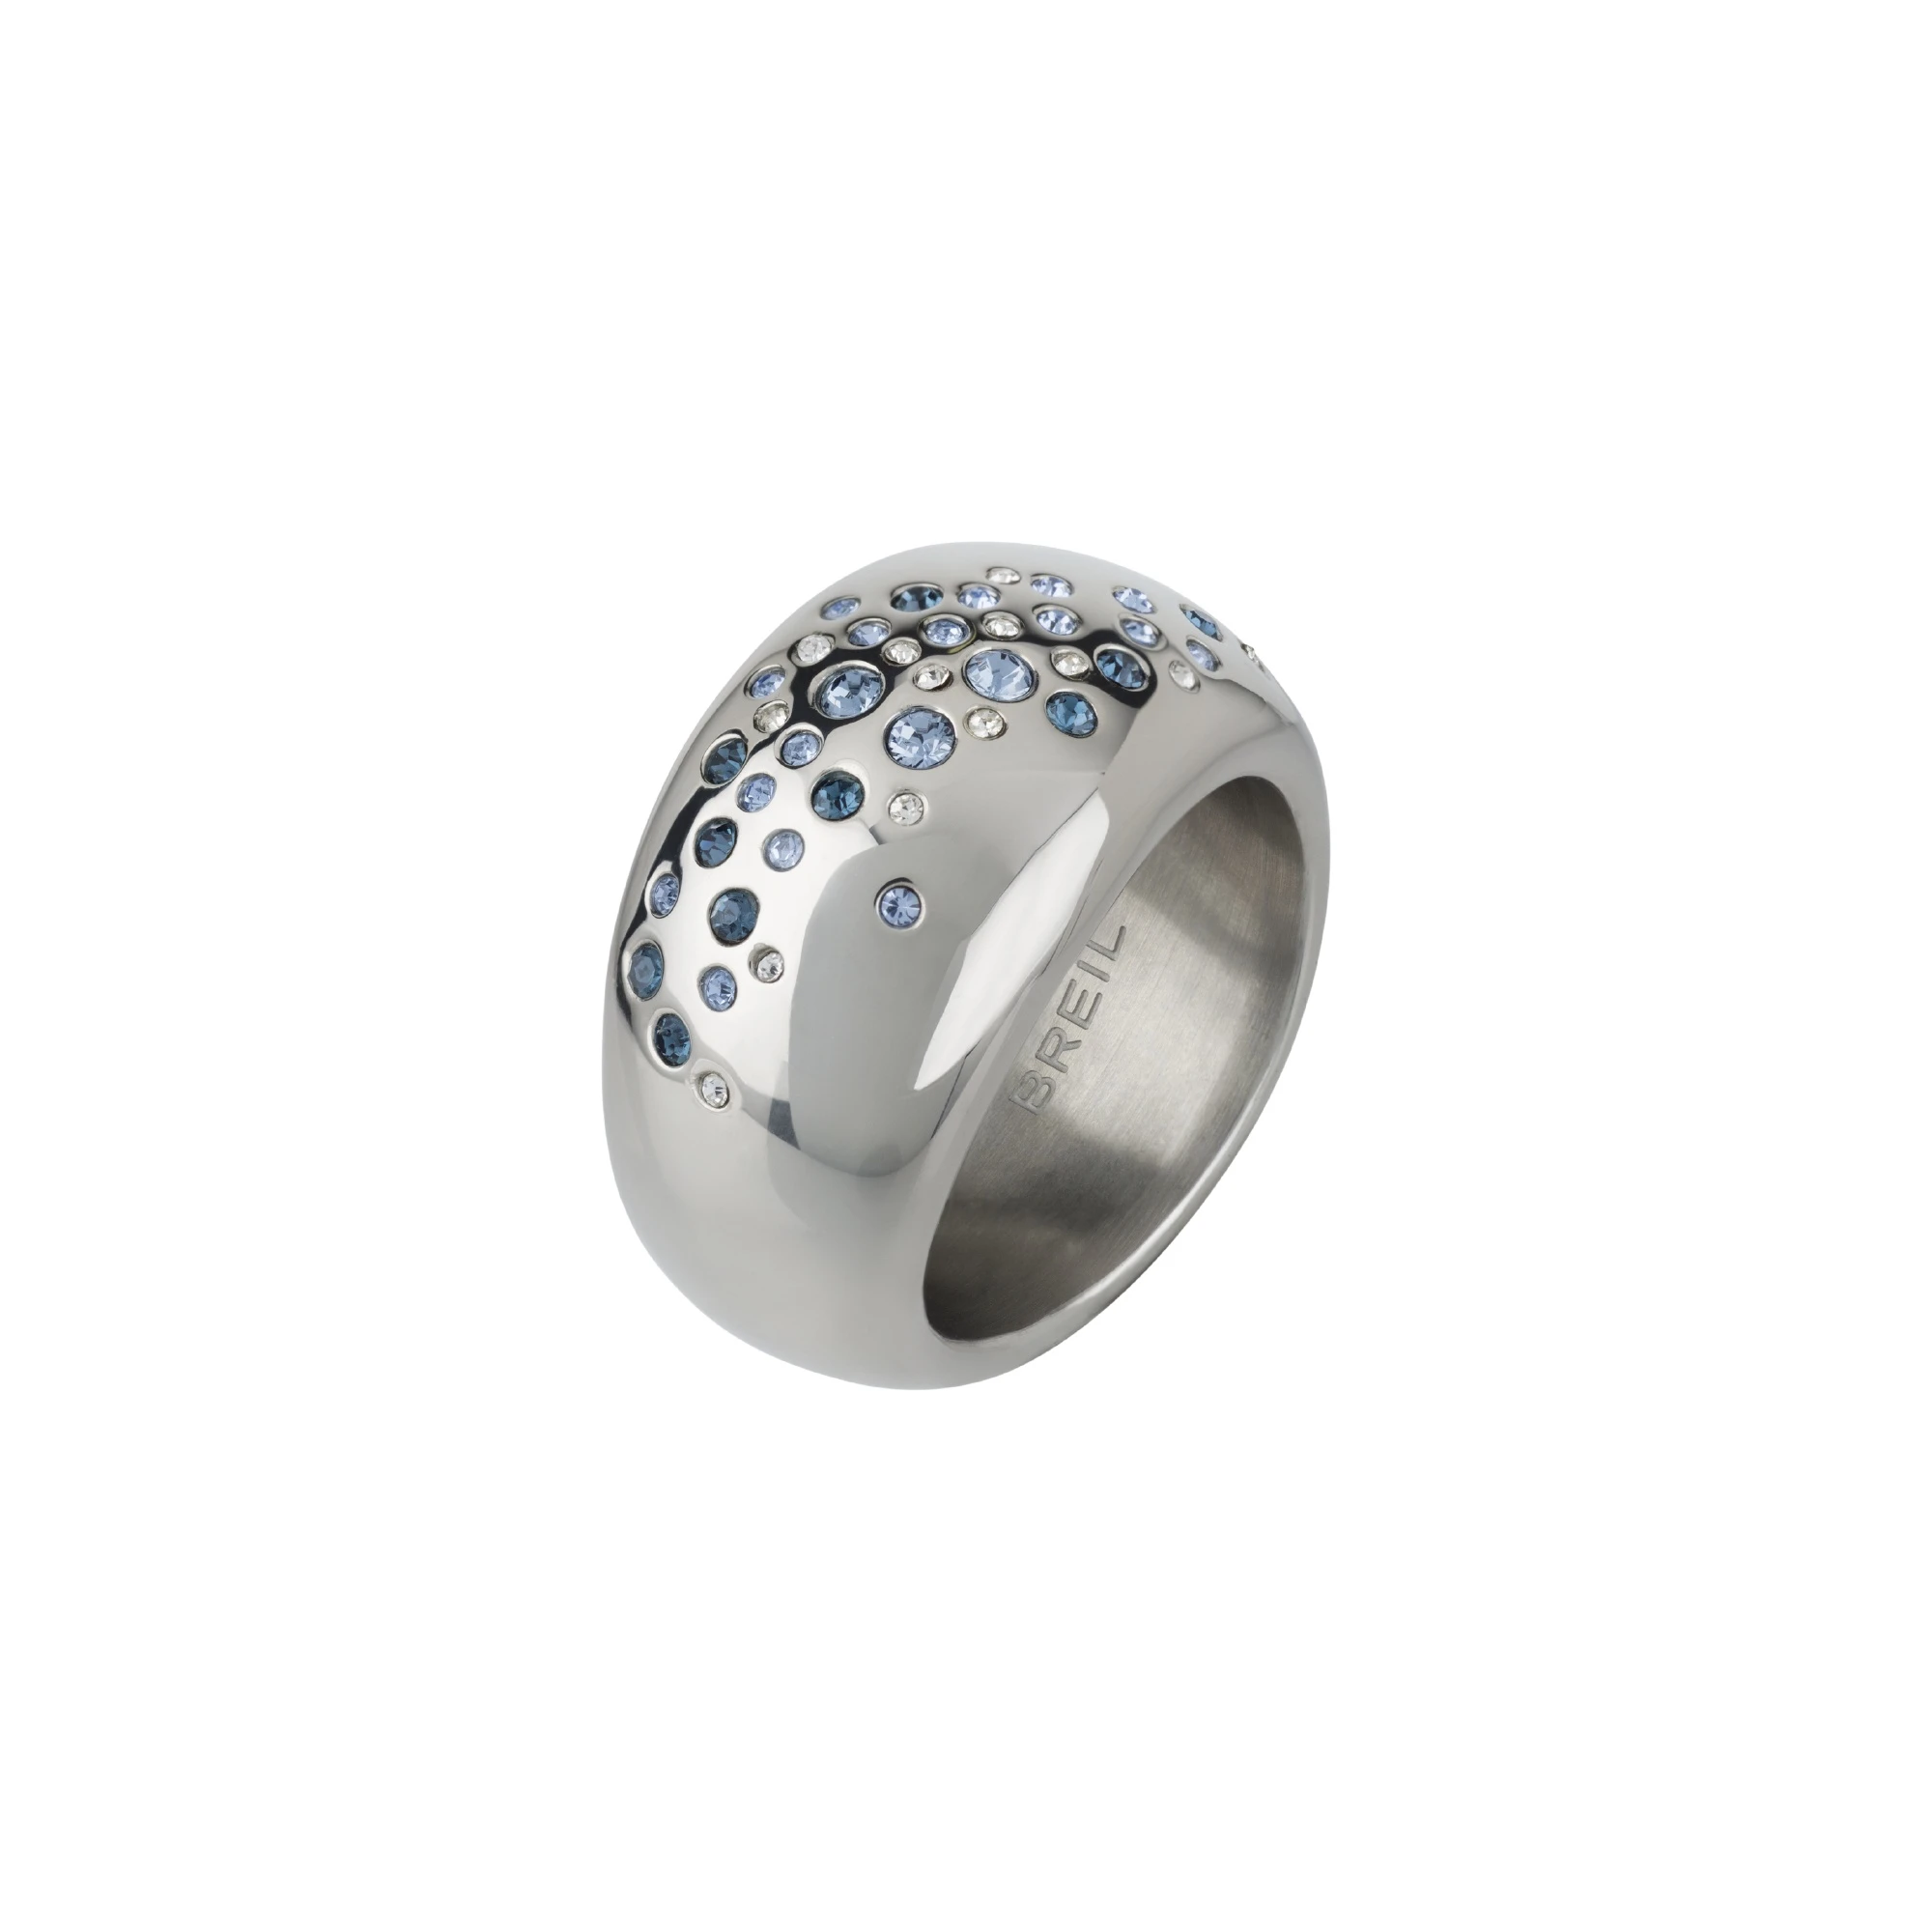 ILLUSION - POLISHED STAINLESS STEEL RING WITH CRYSTALS - 1 - TJ2632_ | Breil